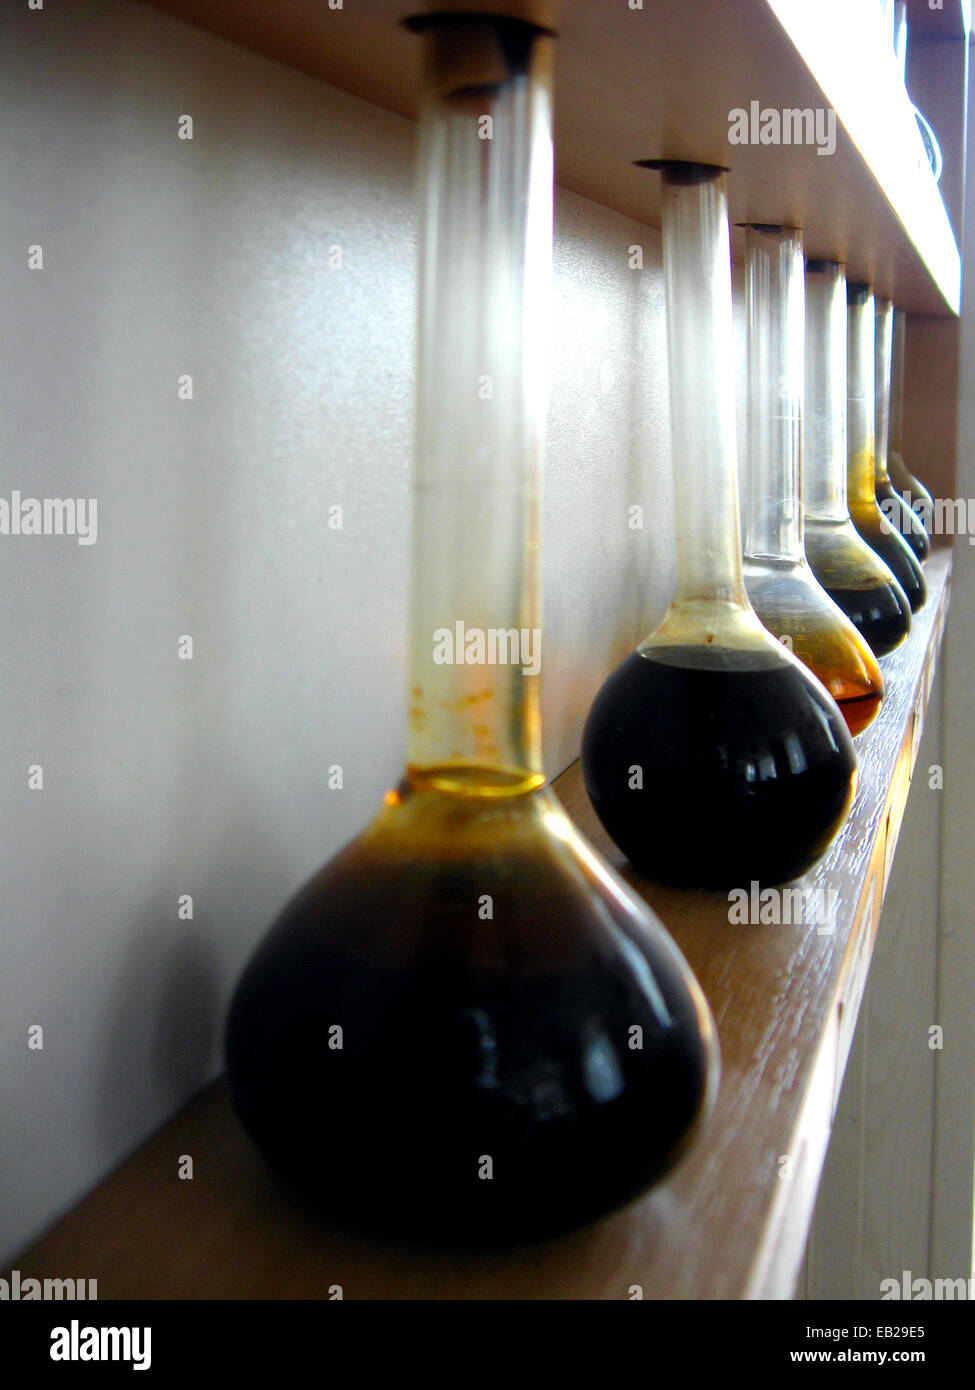 image of specimen of oil in a flask Stock Photo